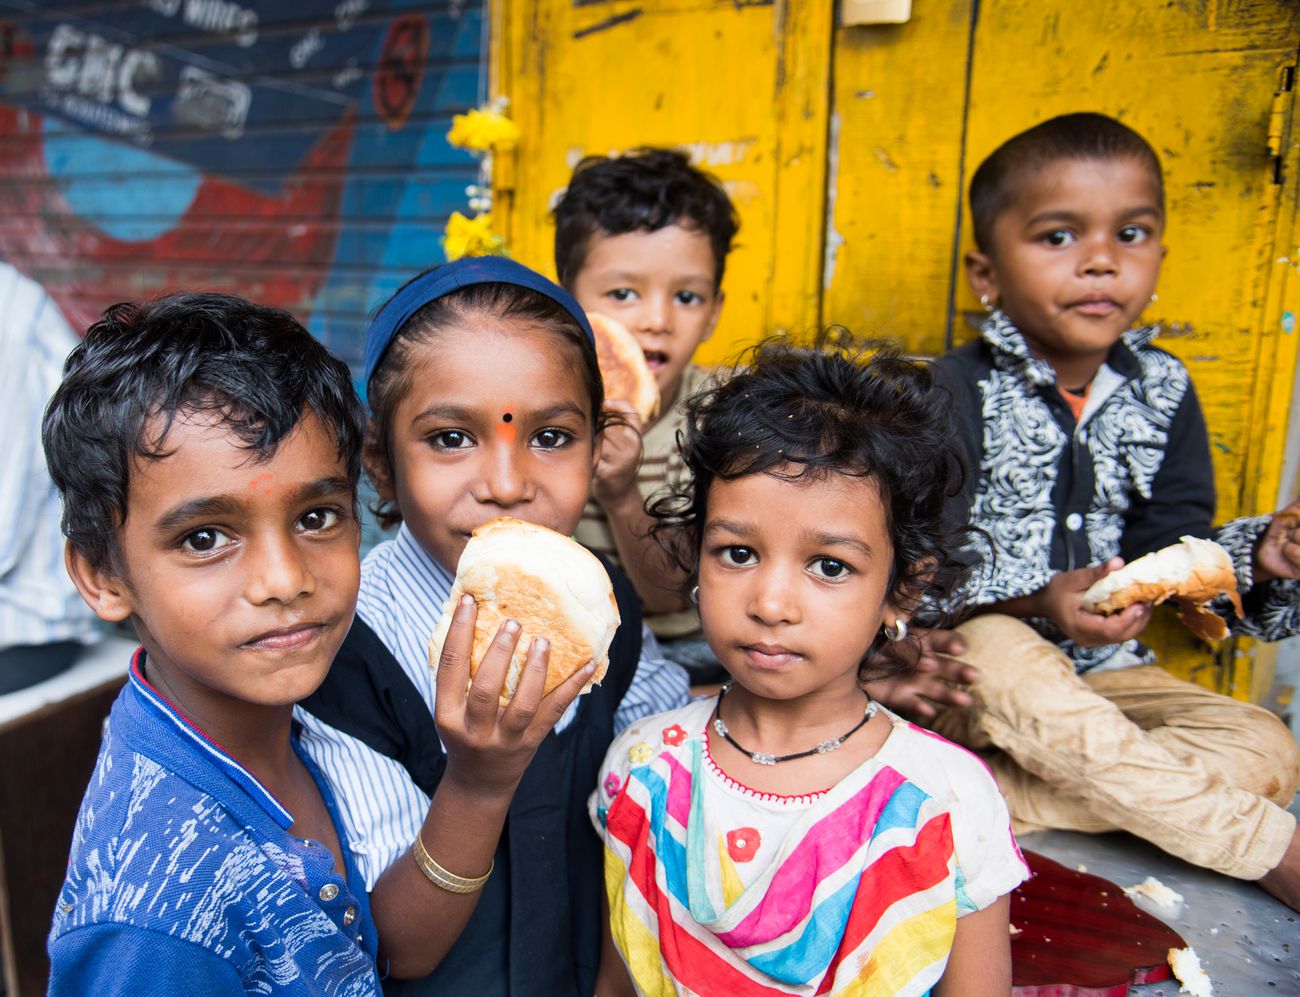 A group of young kids look into the camera while eating sweet bread from a roadside shop